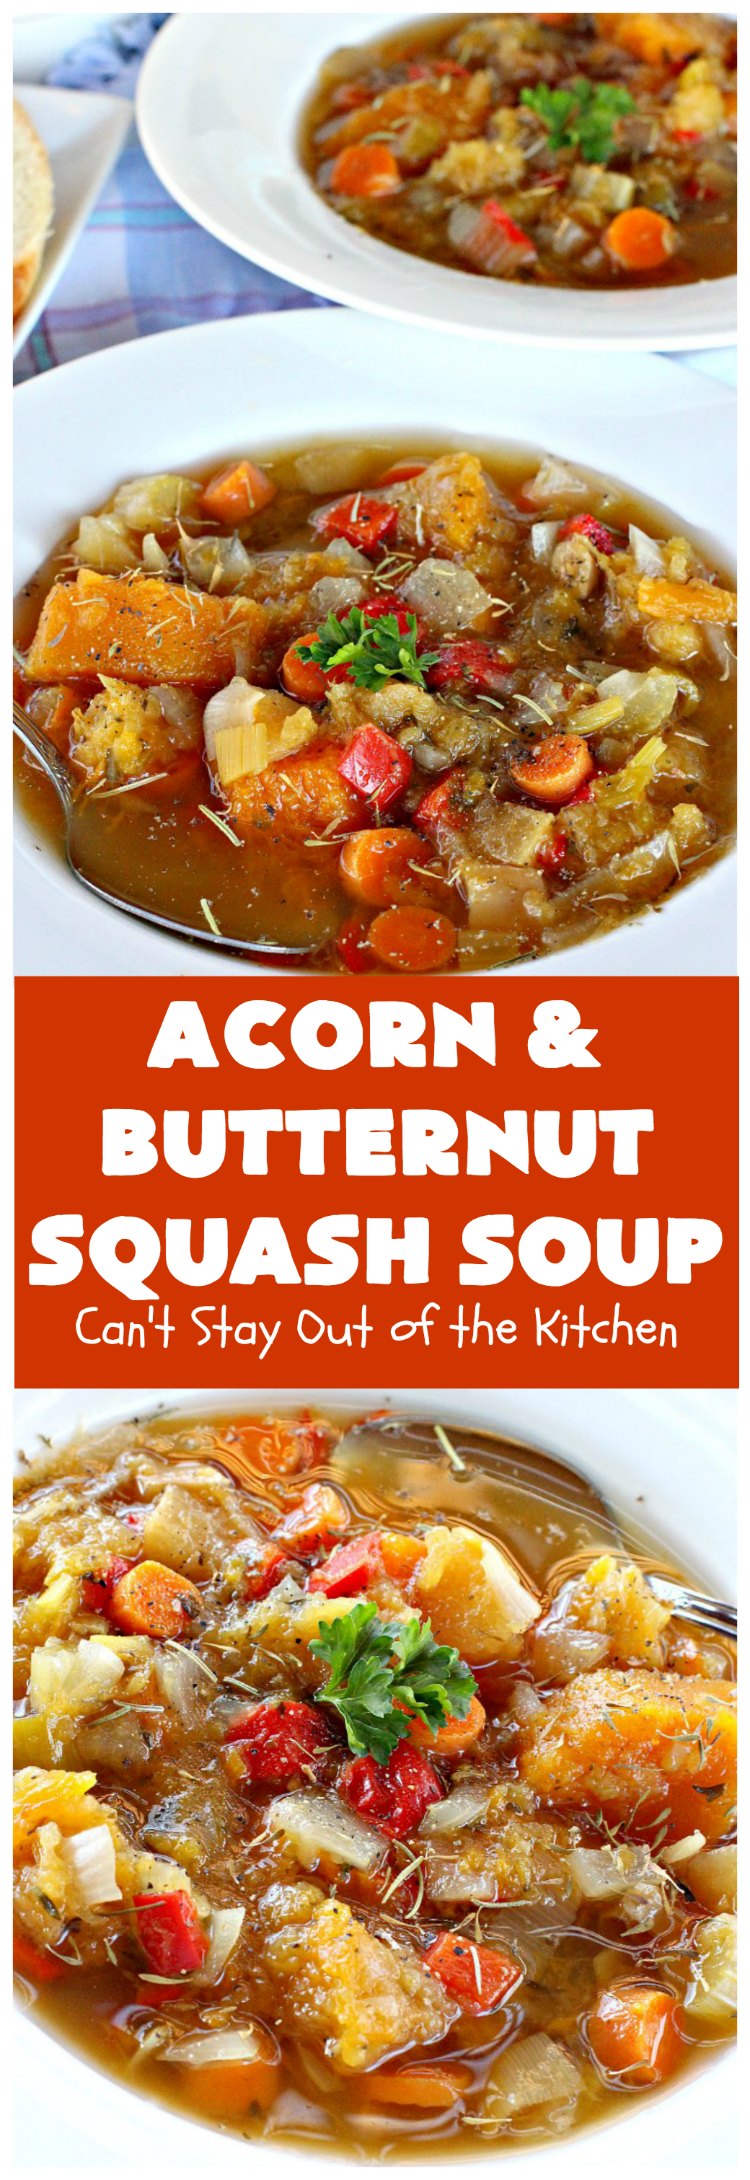 Acorn and Butternut Squash Soup | Can't Stay Out of the Kitchen | this delicious #soup is made with both #acornsquash & #butternutsquash. It also uses #apples & lots of fresh #veggies. Terrific comfort food for cool, fall nights. Plus, it's so easy since it's made in the #slowcooker. #Healthy #LowCalorie #vegan #glutenfree #cleaneating #crockpot